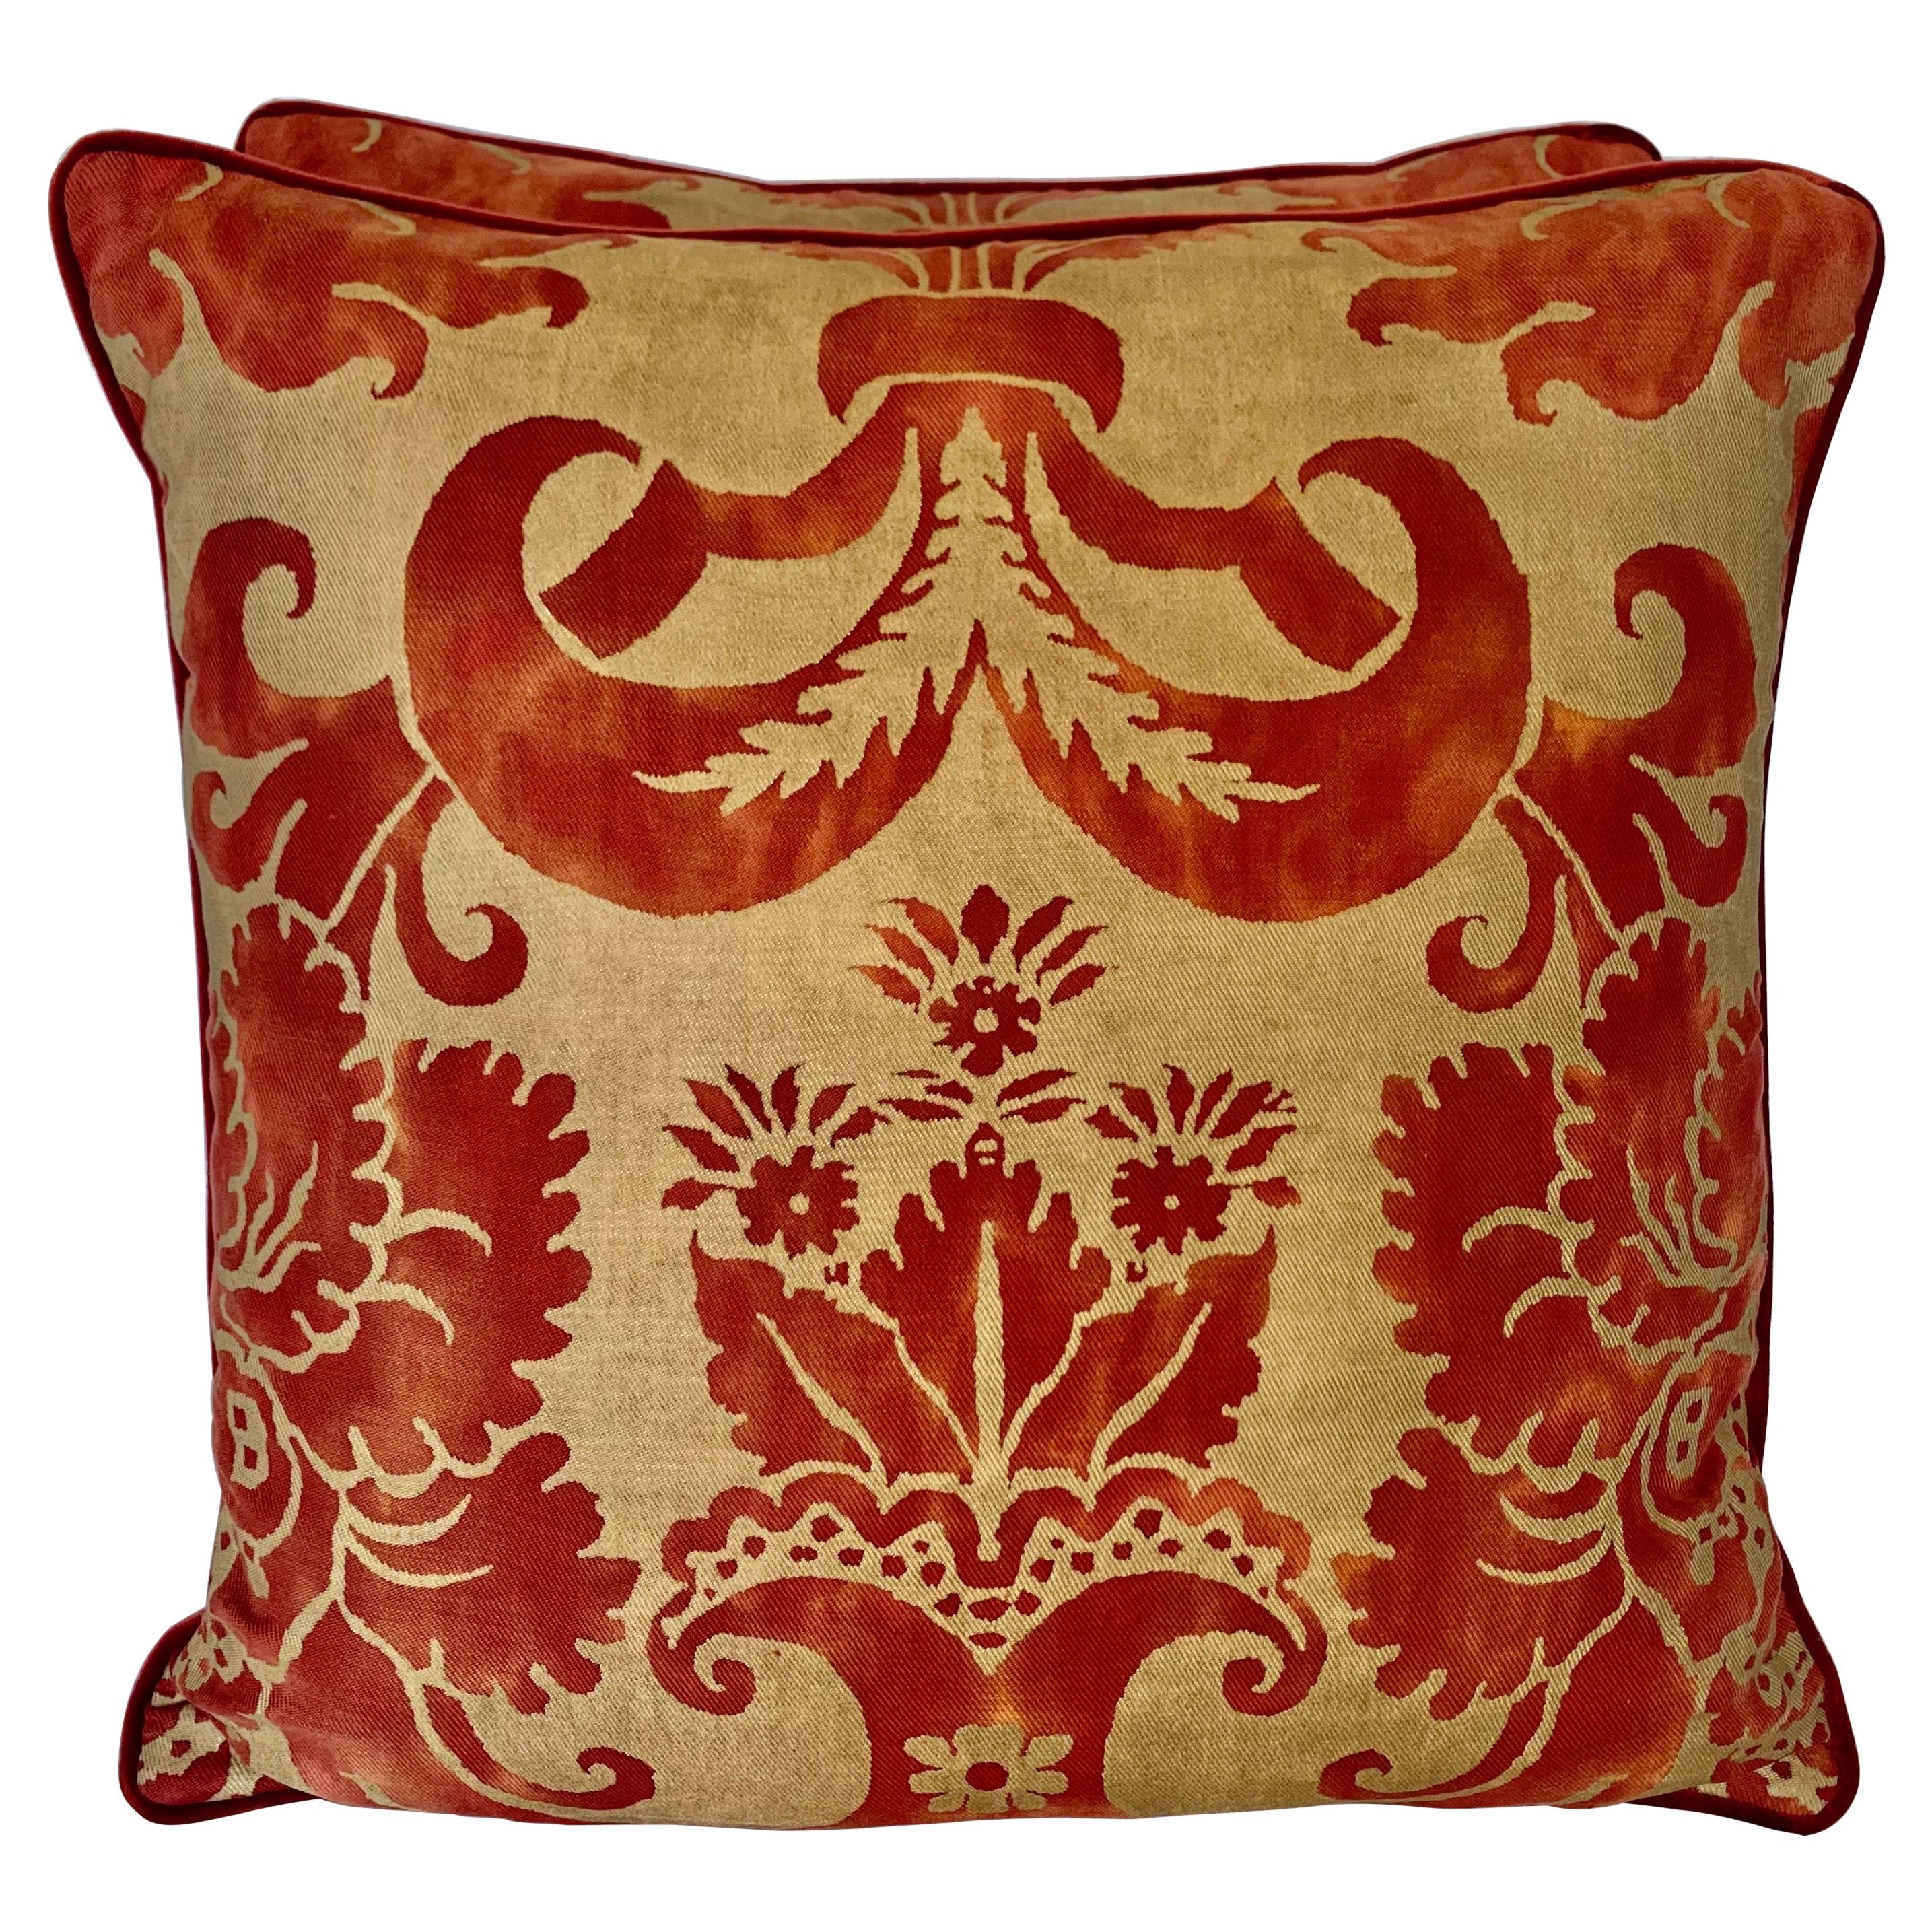 Pair of Custom Glicine Patterned Fortuny Pillows